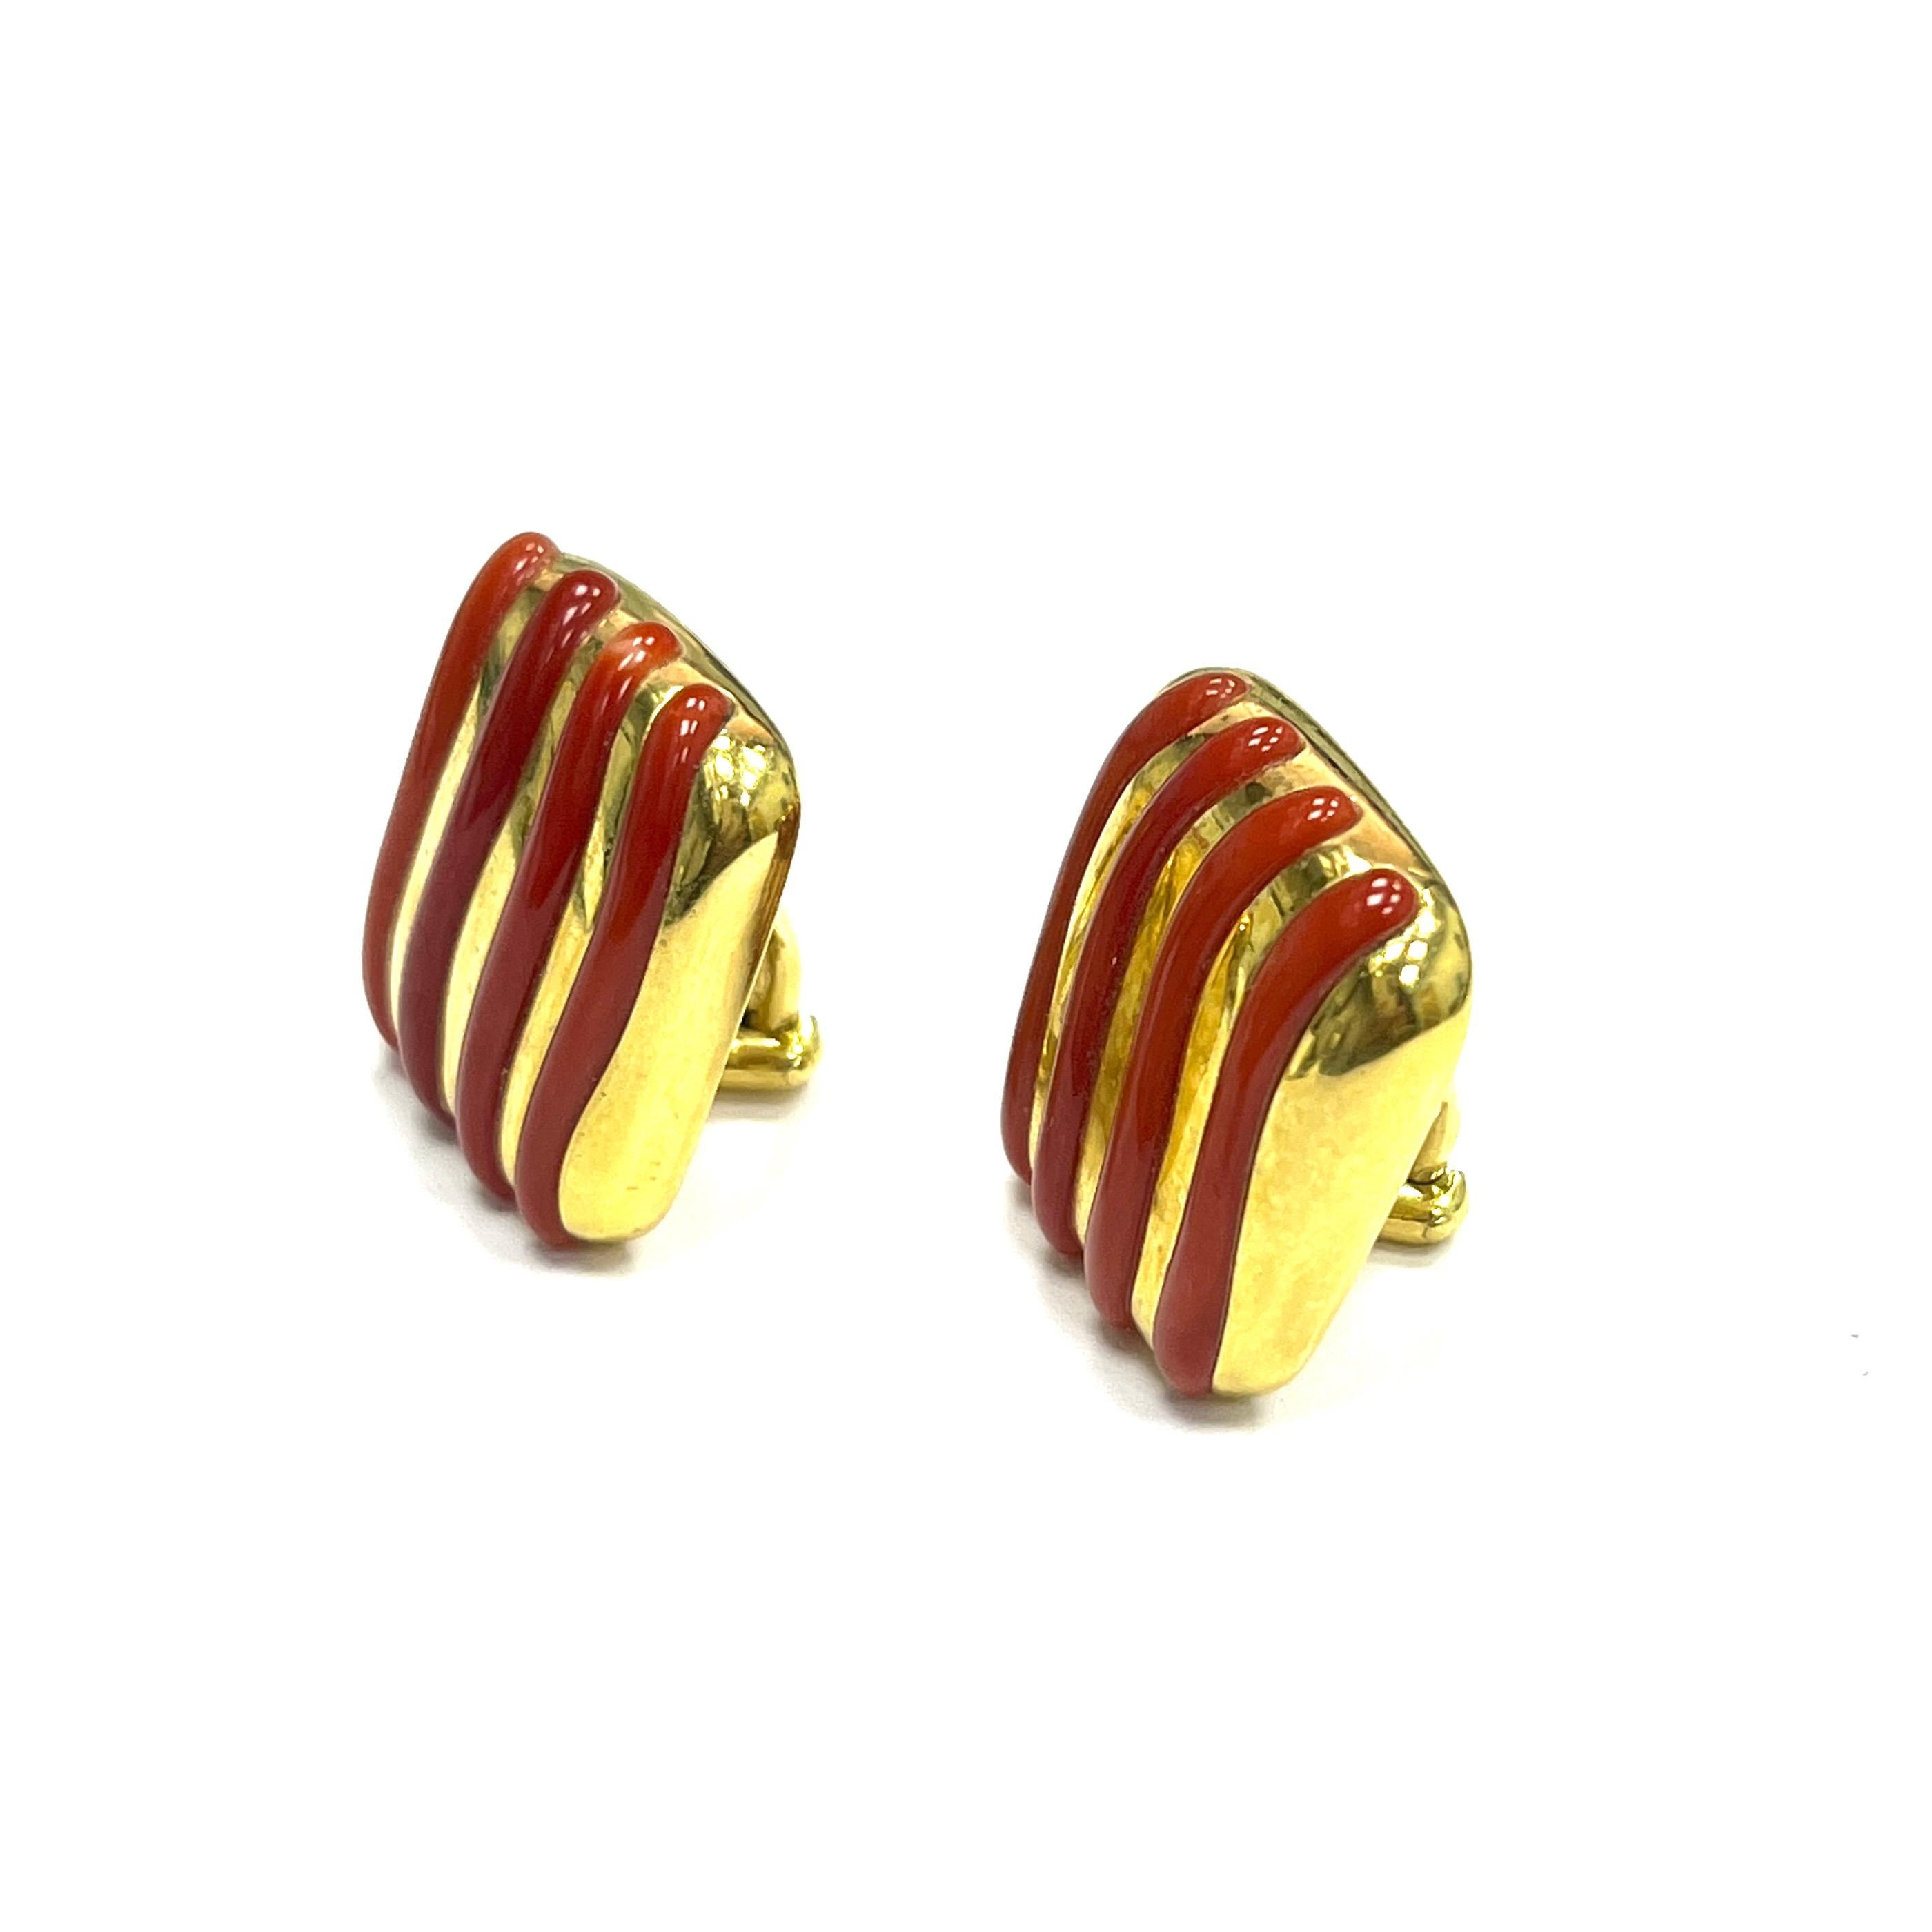 Angela Cummings agate carnelian yellow gold ear clips, 1989

Square 18 karat yellow gold with four slightly curved lines of agate carnelian; marked Angela Cummings, 18k, 1989

Size: width 2 cm, length 2.3 cm
Total weight: 20.6 grams